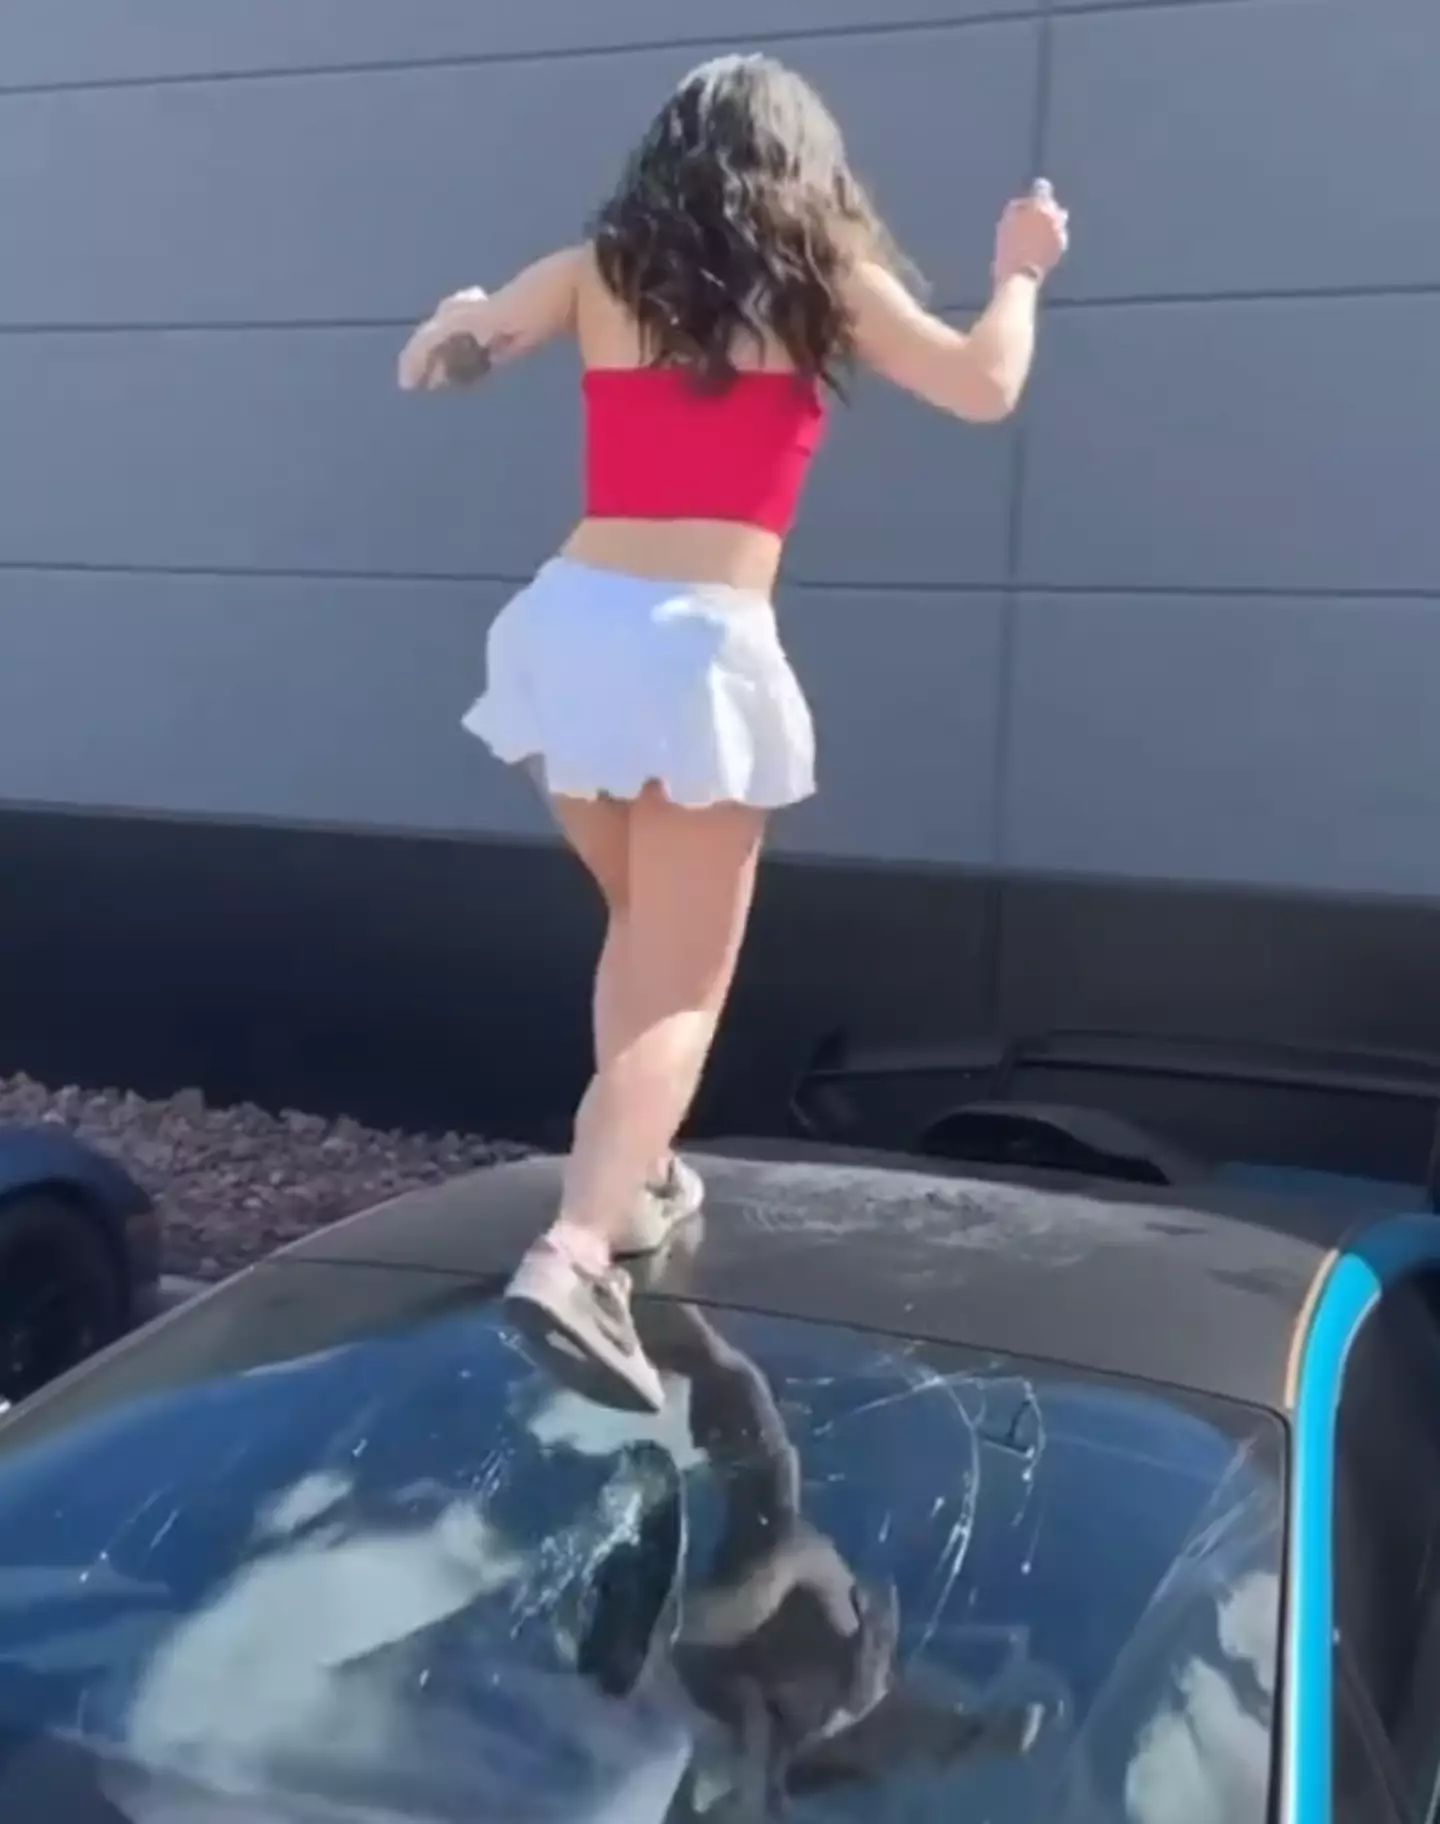 The windscreen was left with a huge crack. (TikTok/@snowbunnyjelly)